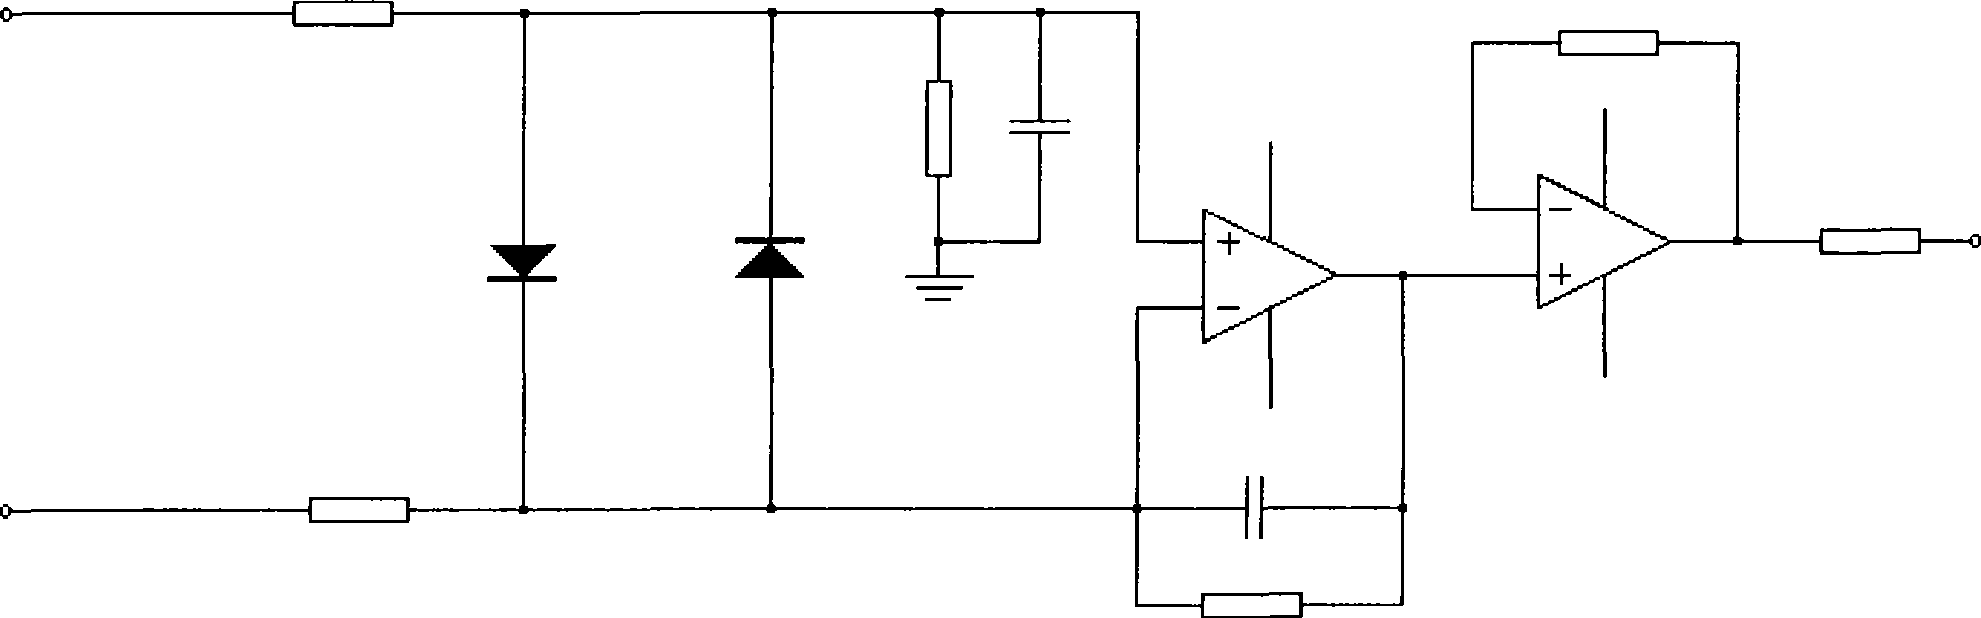 DC bus-bar voltage collection method for frequency changer